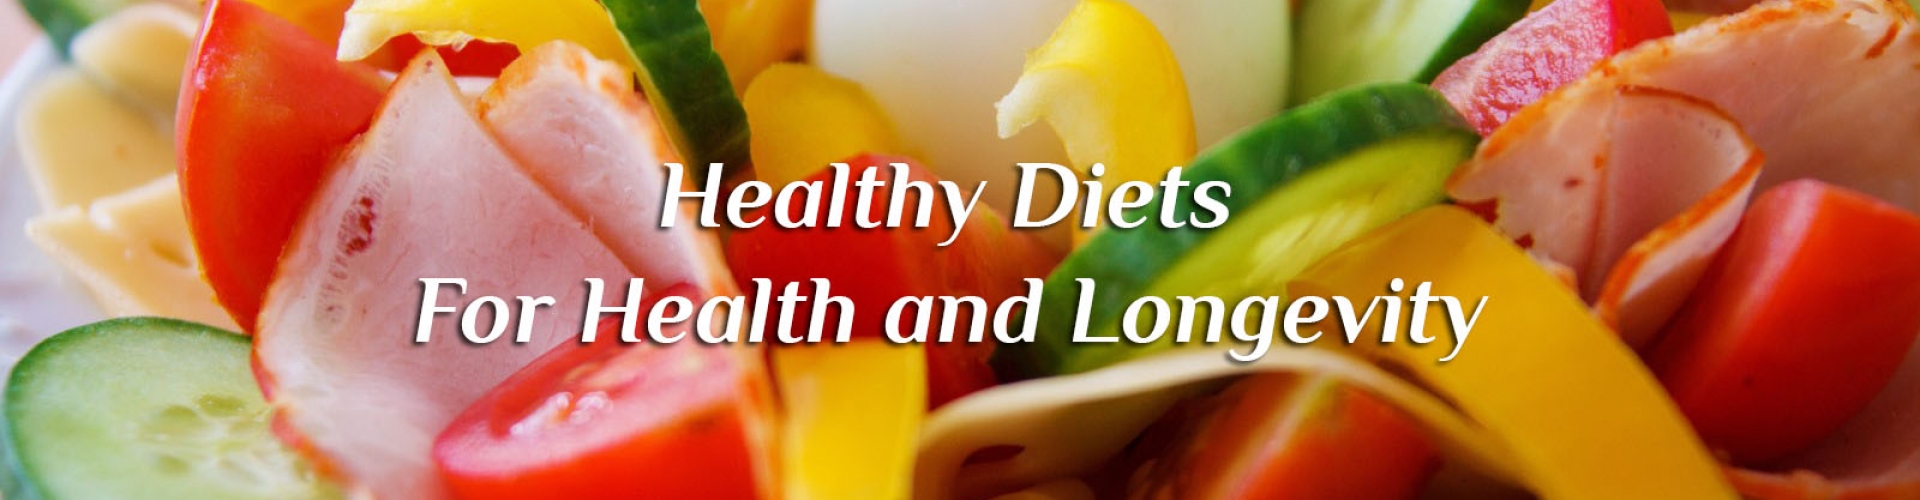 Healthy Dieting and Proper Nutrition